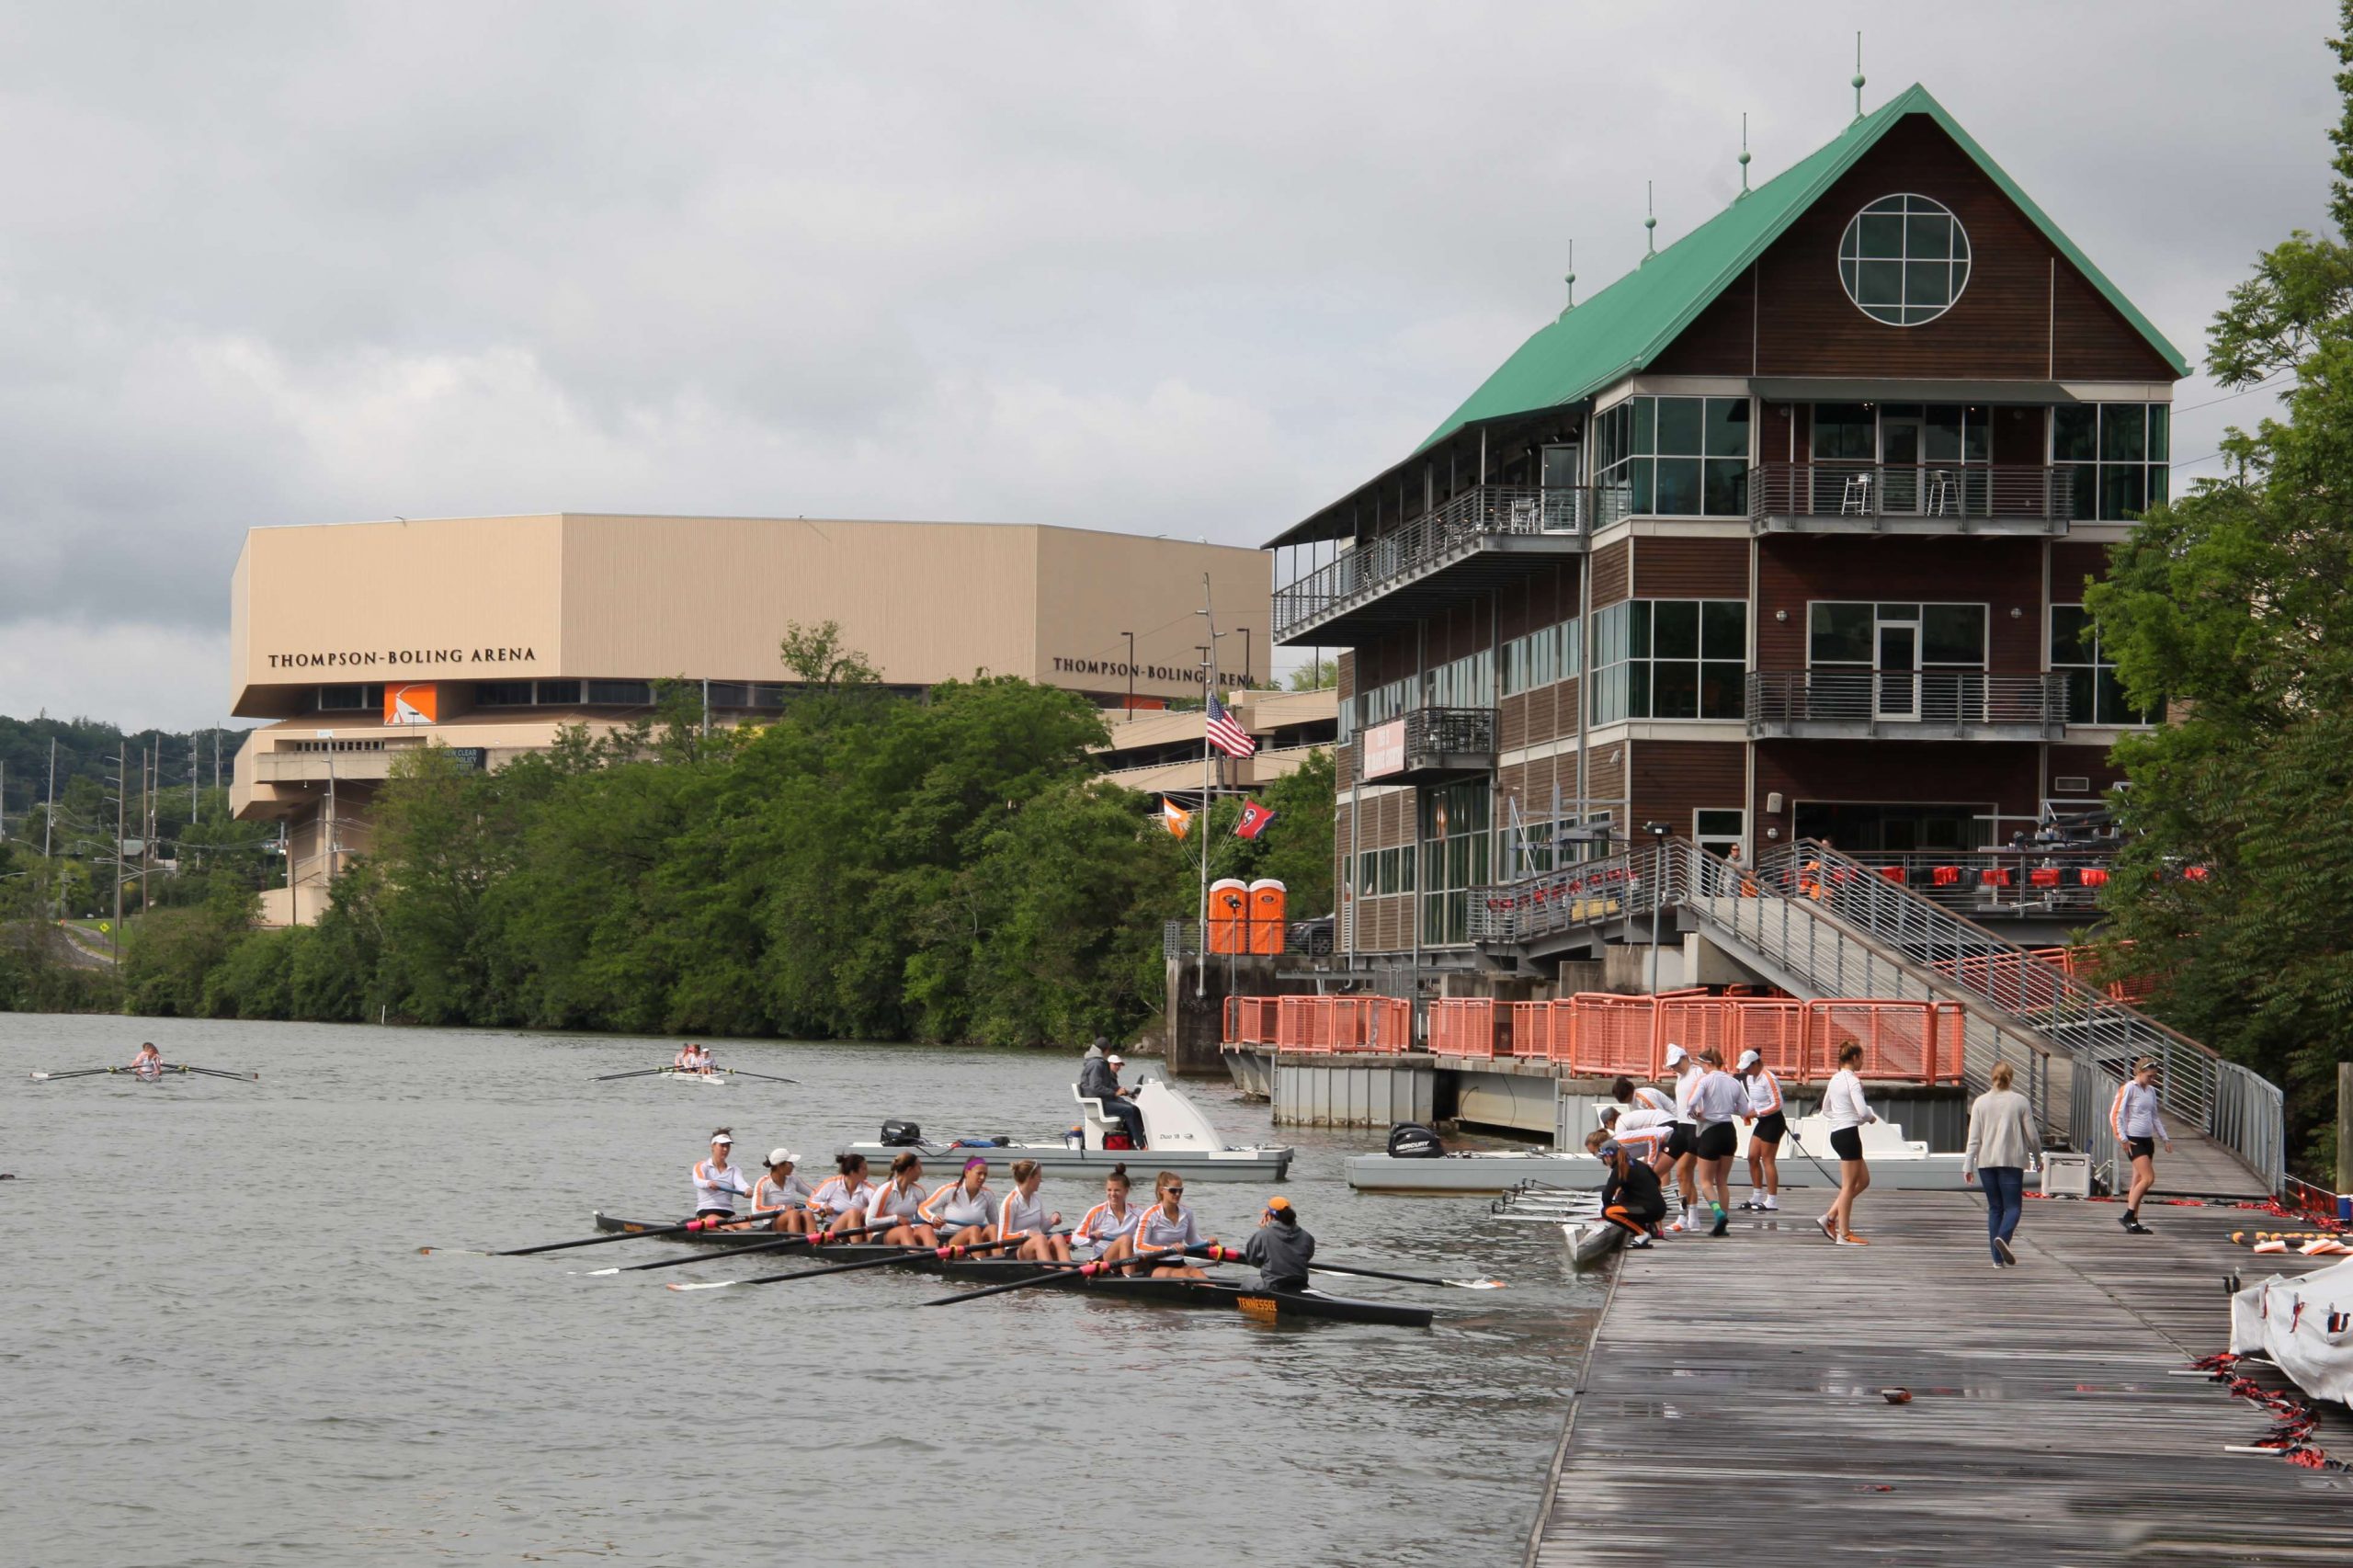 The University of Tennessee Rowing Club also has a facility on Volunteer Landing. That's the Thompson Boling Arena in the background. It will be the location for the 2023 Bassmaster Classic weigh-ins. 